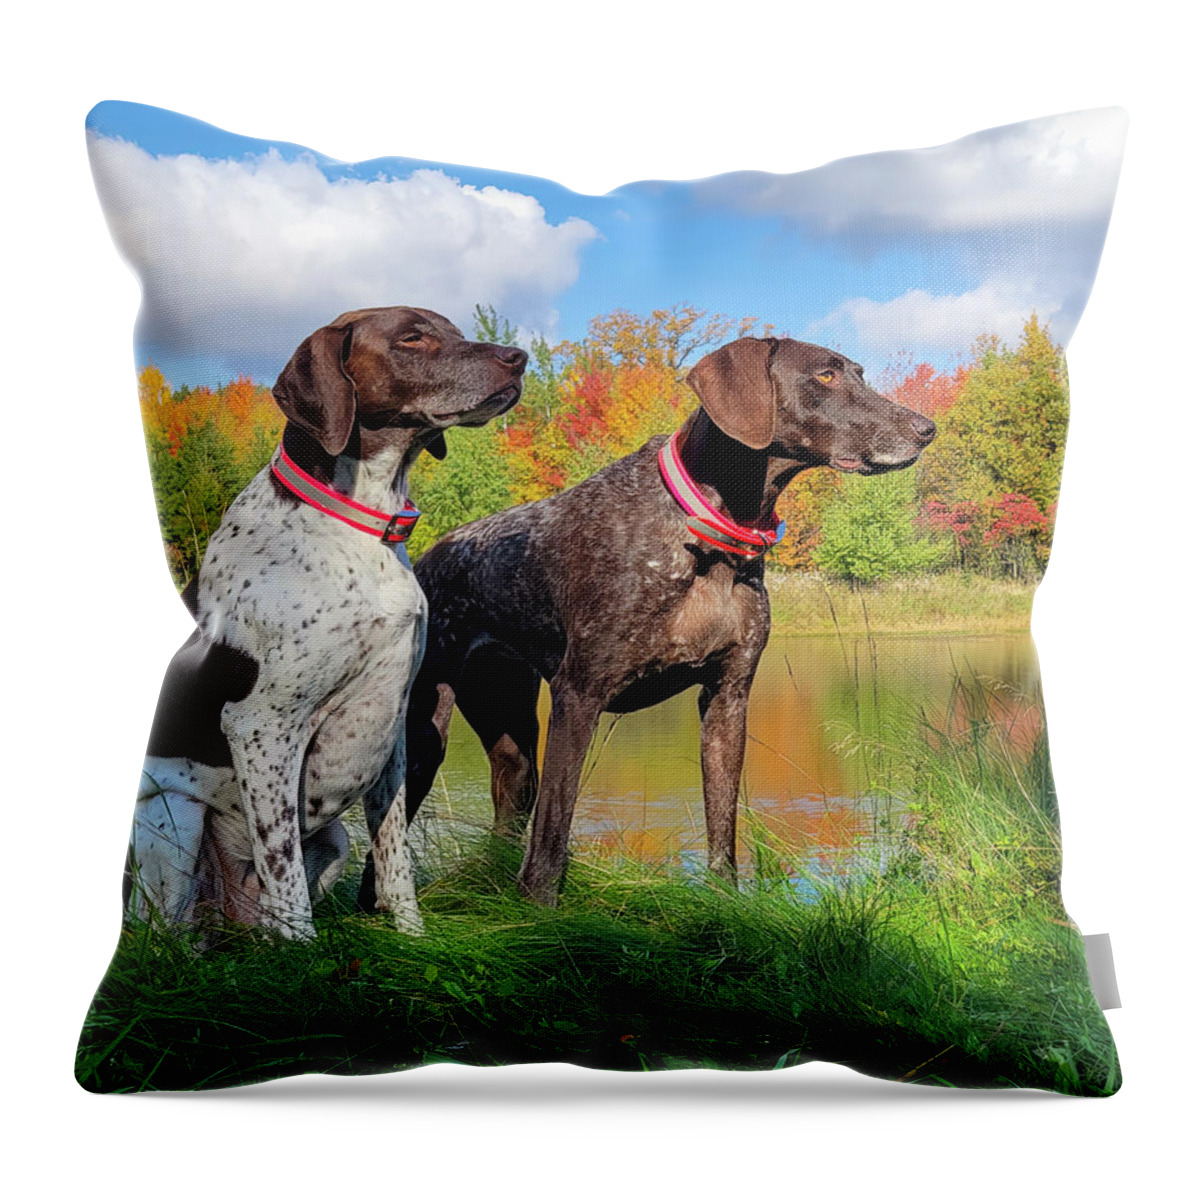 German Shorthaired Pointers Throw Pillow featuring the photograph German Shorthaired Pointers by Brook Burling